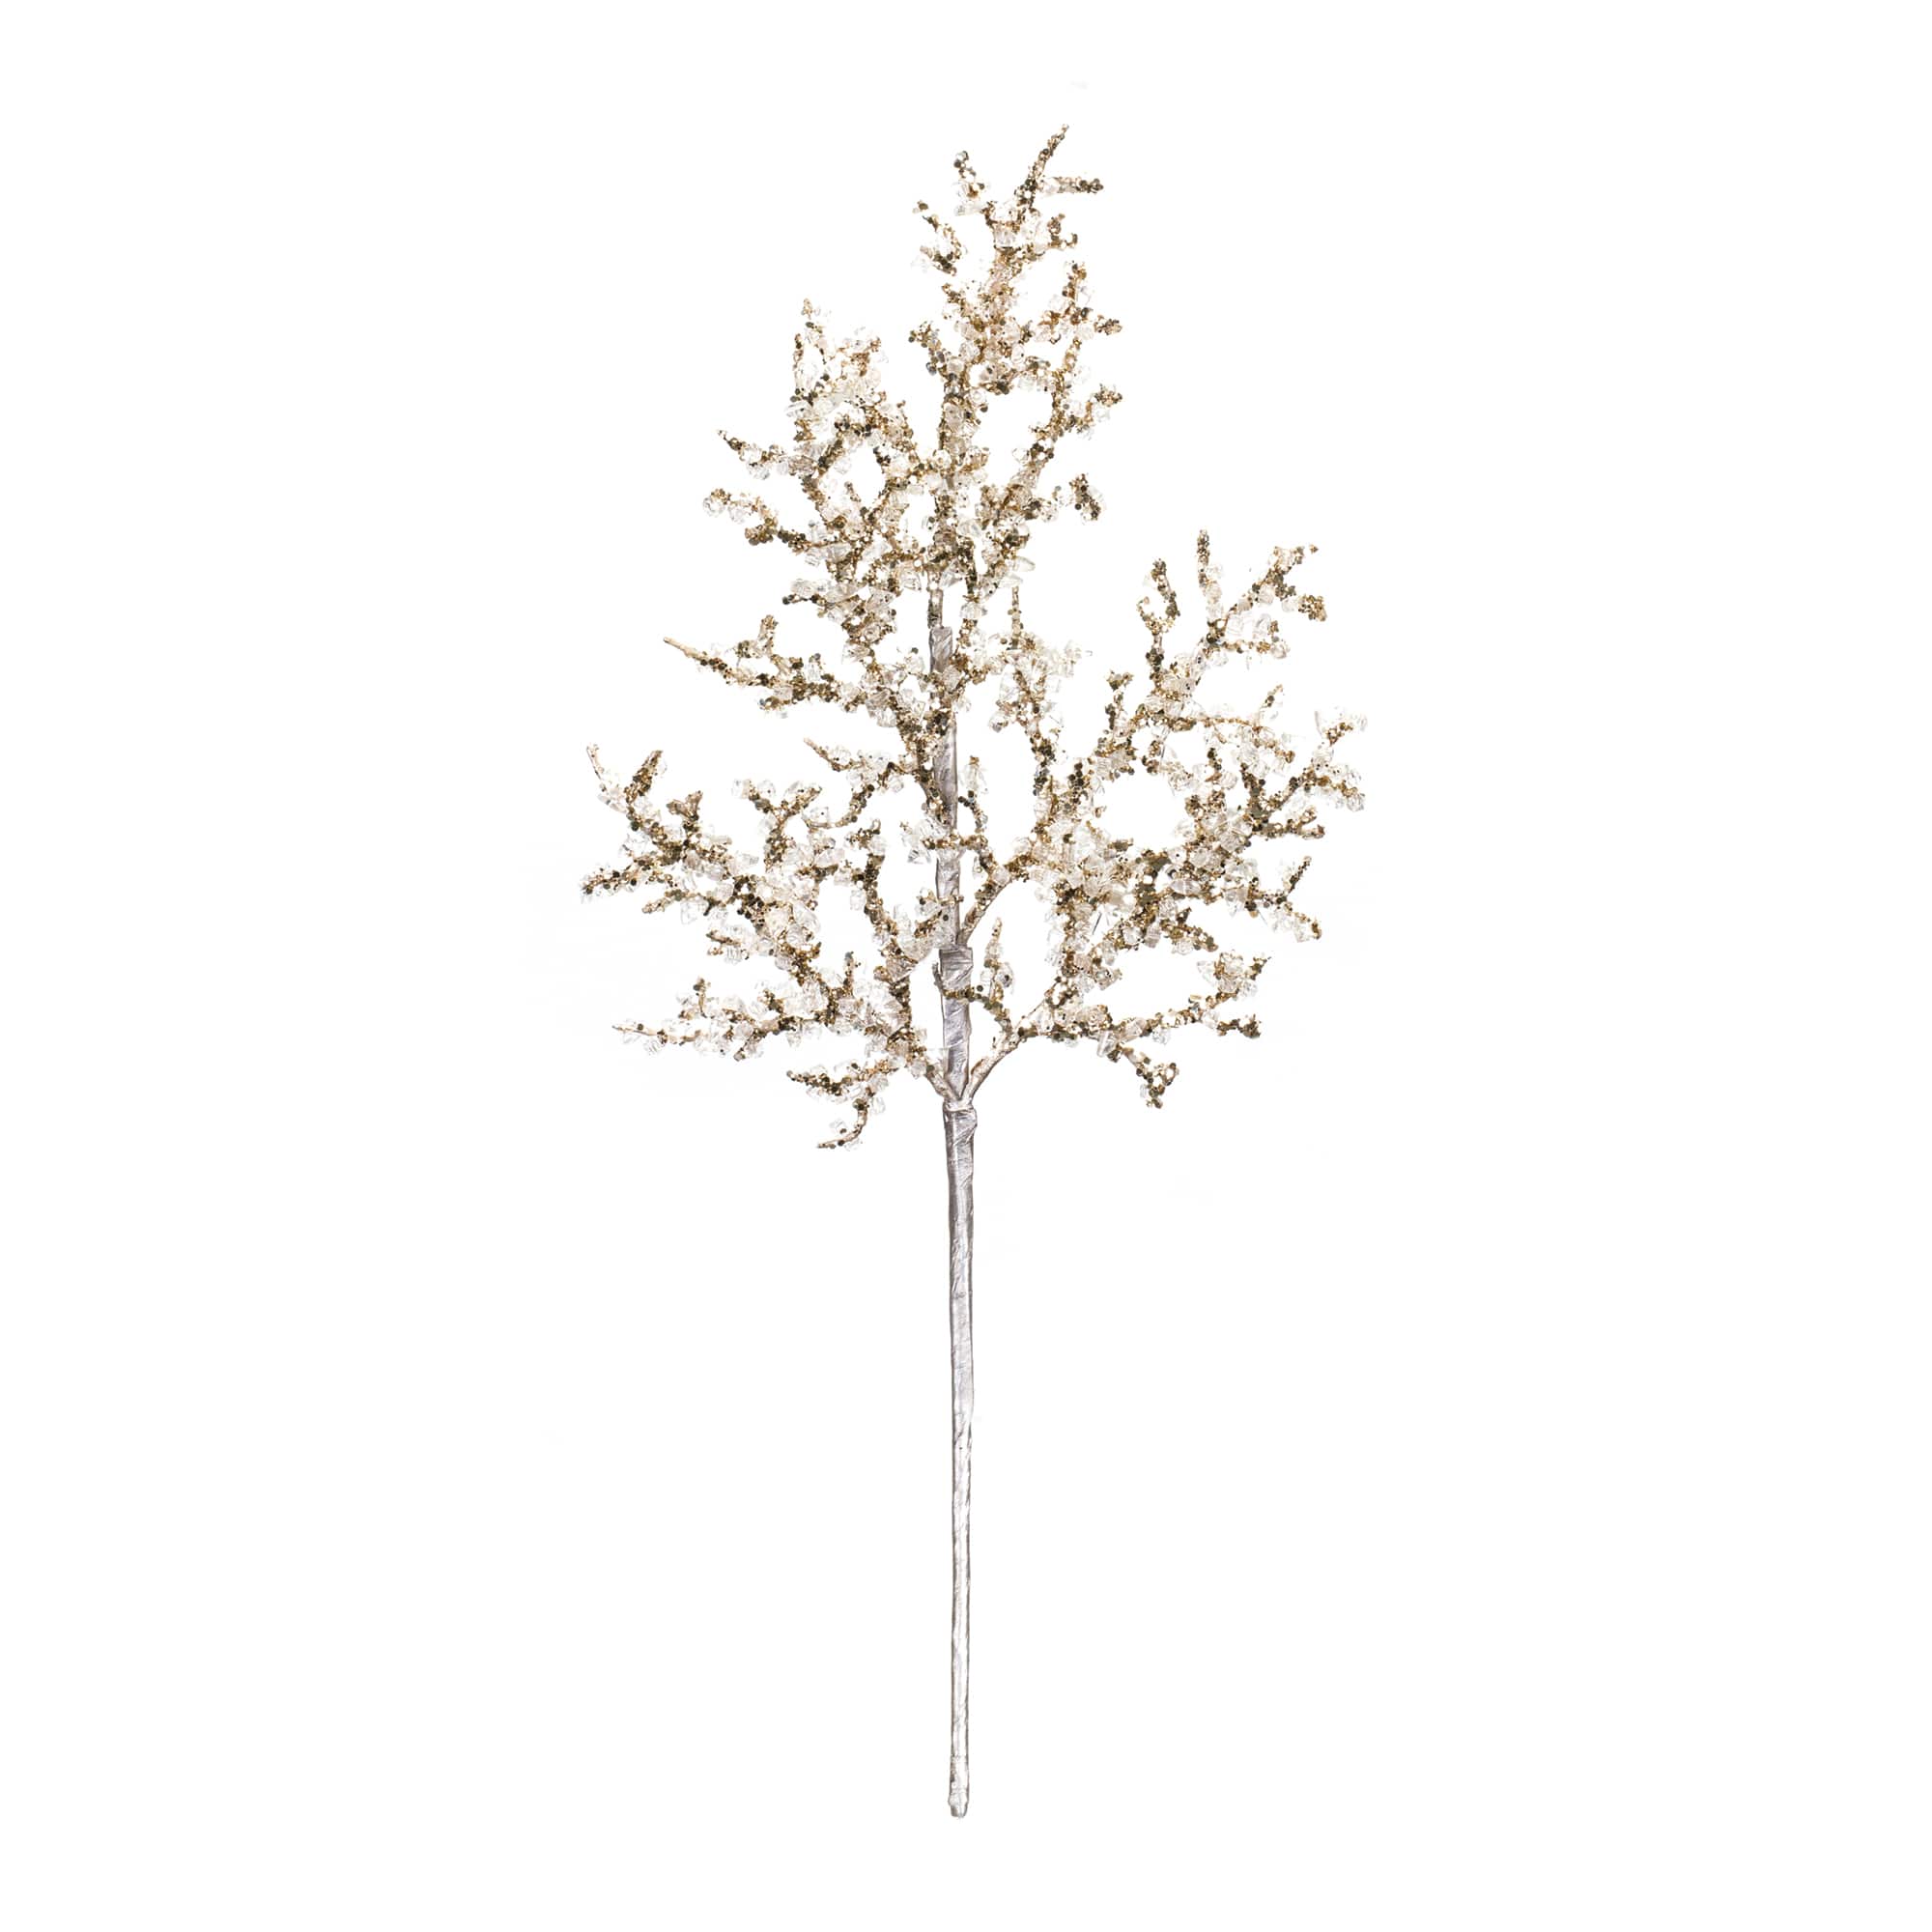 Glittery Gold Iced Twig Branches, 12ct.